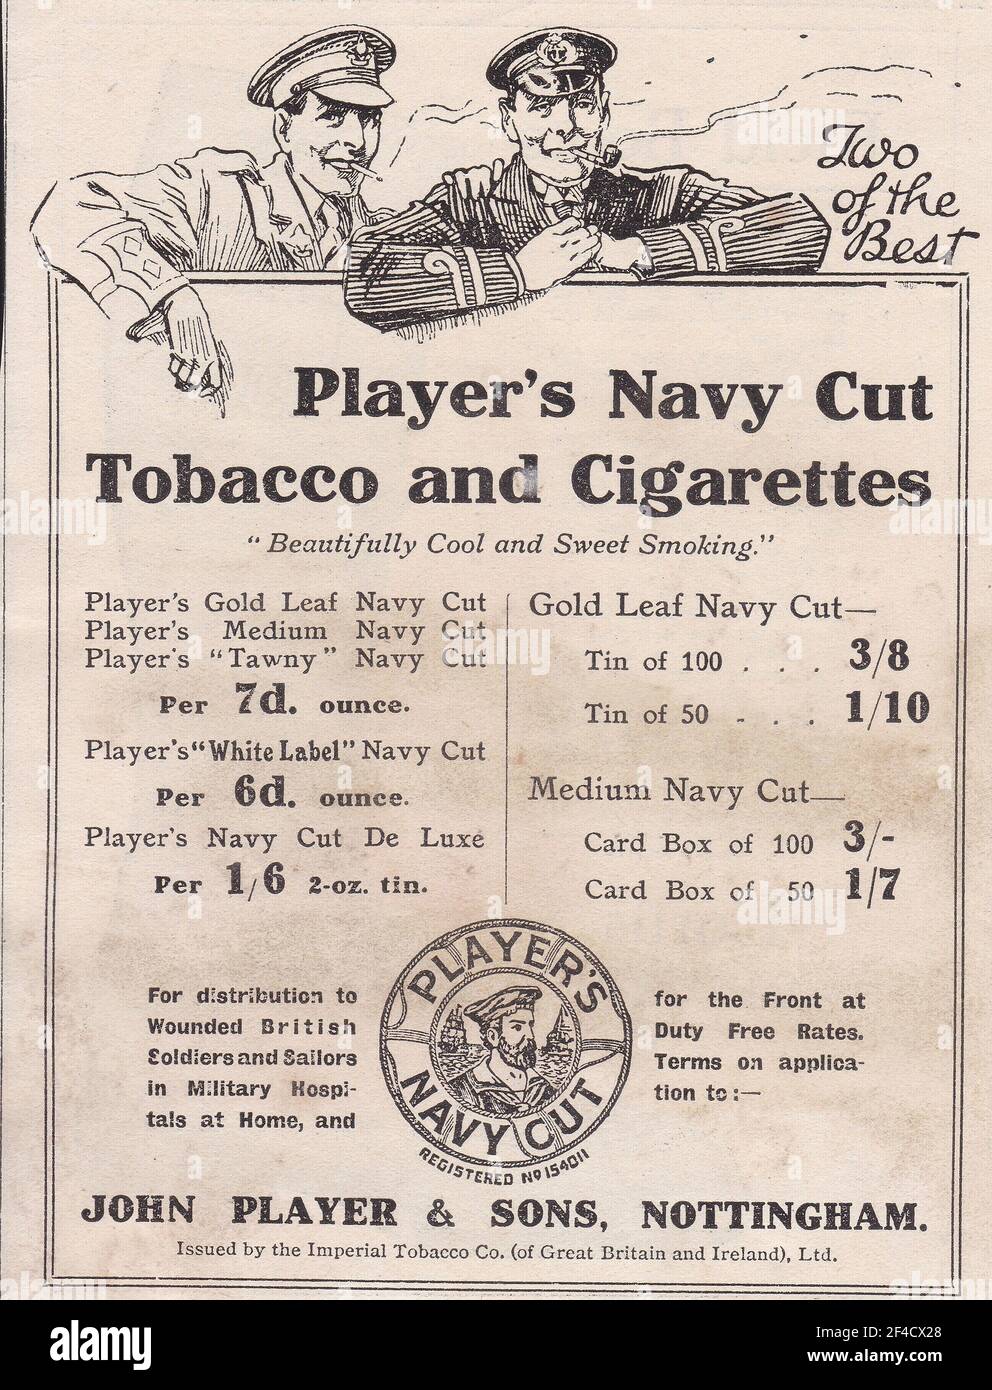 Vintage advert for Player's Navy Cut Tobacco and Cigarettes by John Player & Sons, Nottingham. Stock Photo